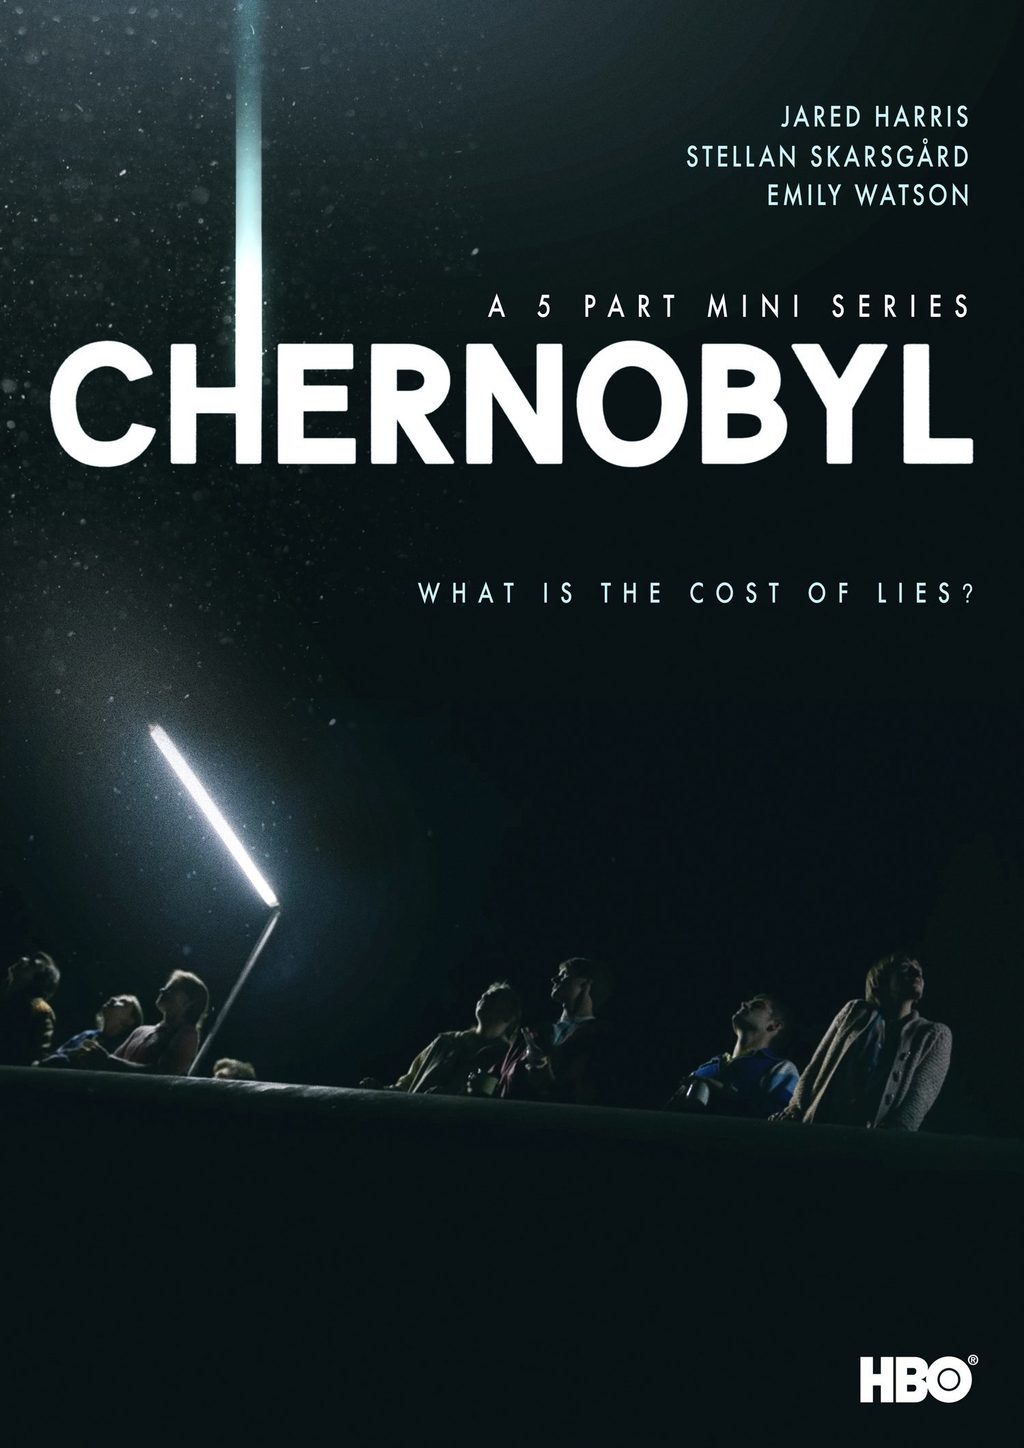 cost of lies - Jared Harris Stellan Skarsgrd Emily Watson A 5 Part Mini Series Chernobyl What Is The Cost Of Lies? Hbo